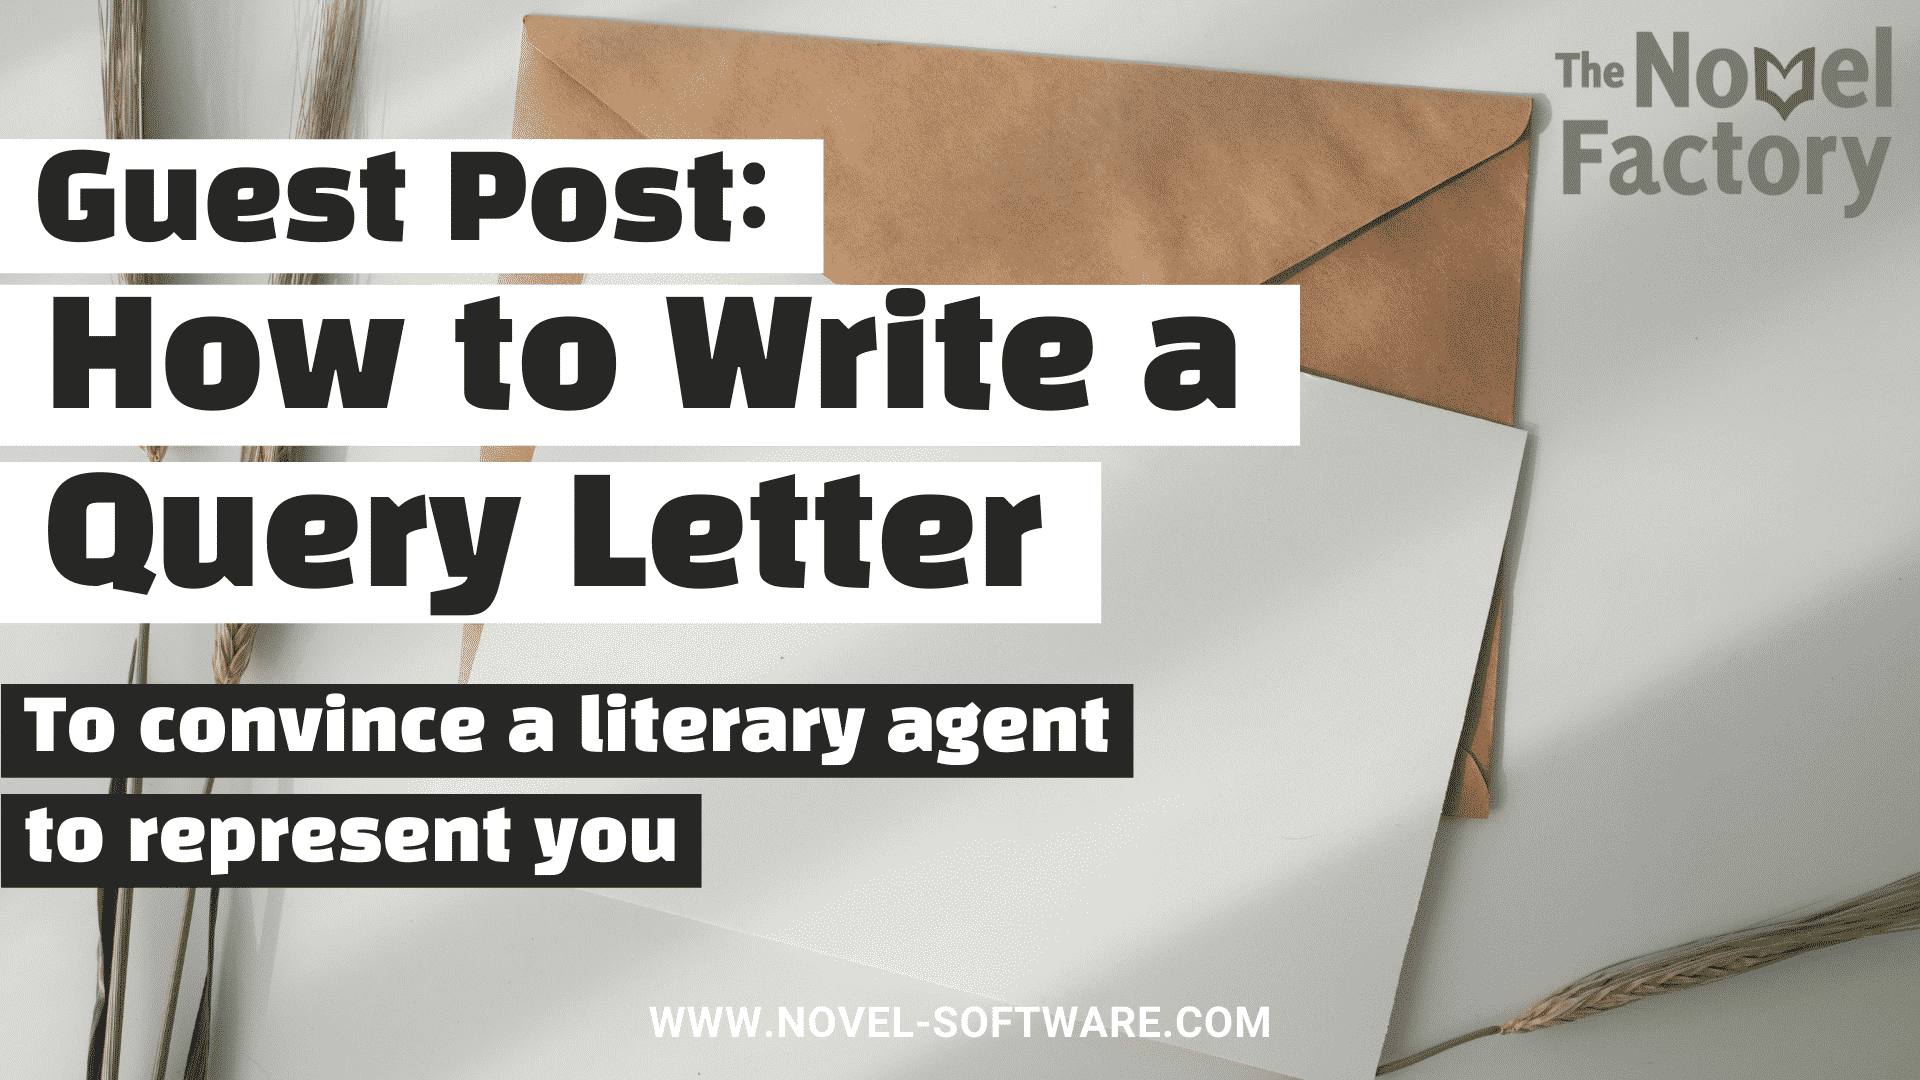 Guest Post How to Write a Query Letter(1)